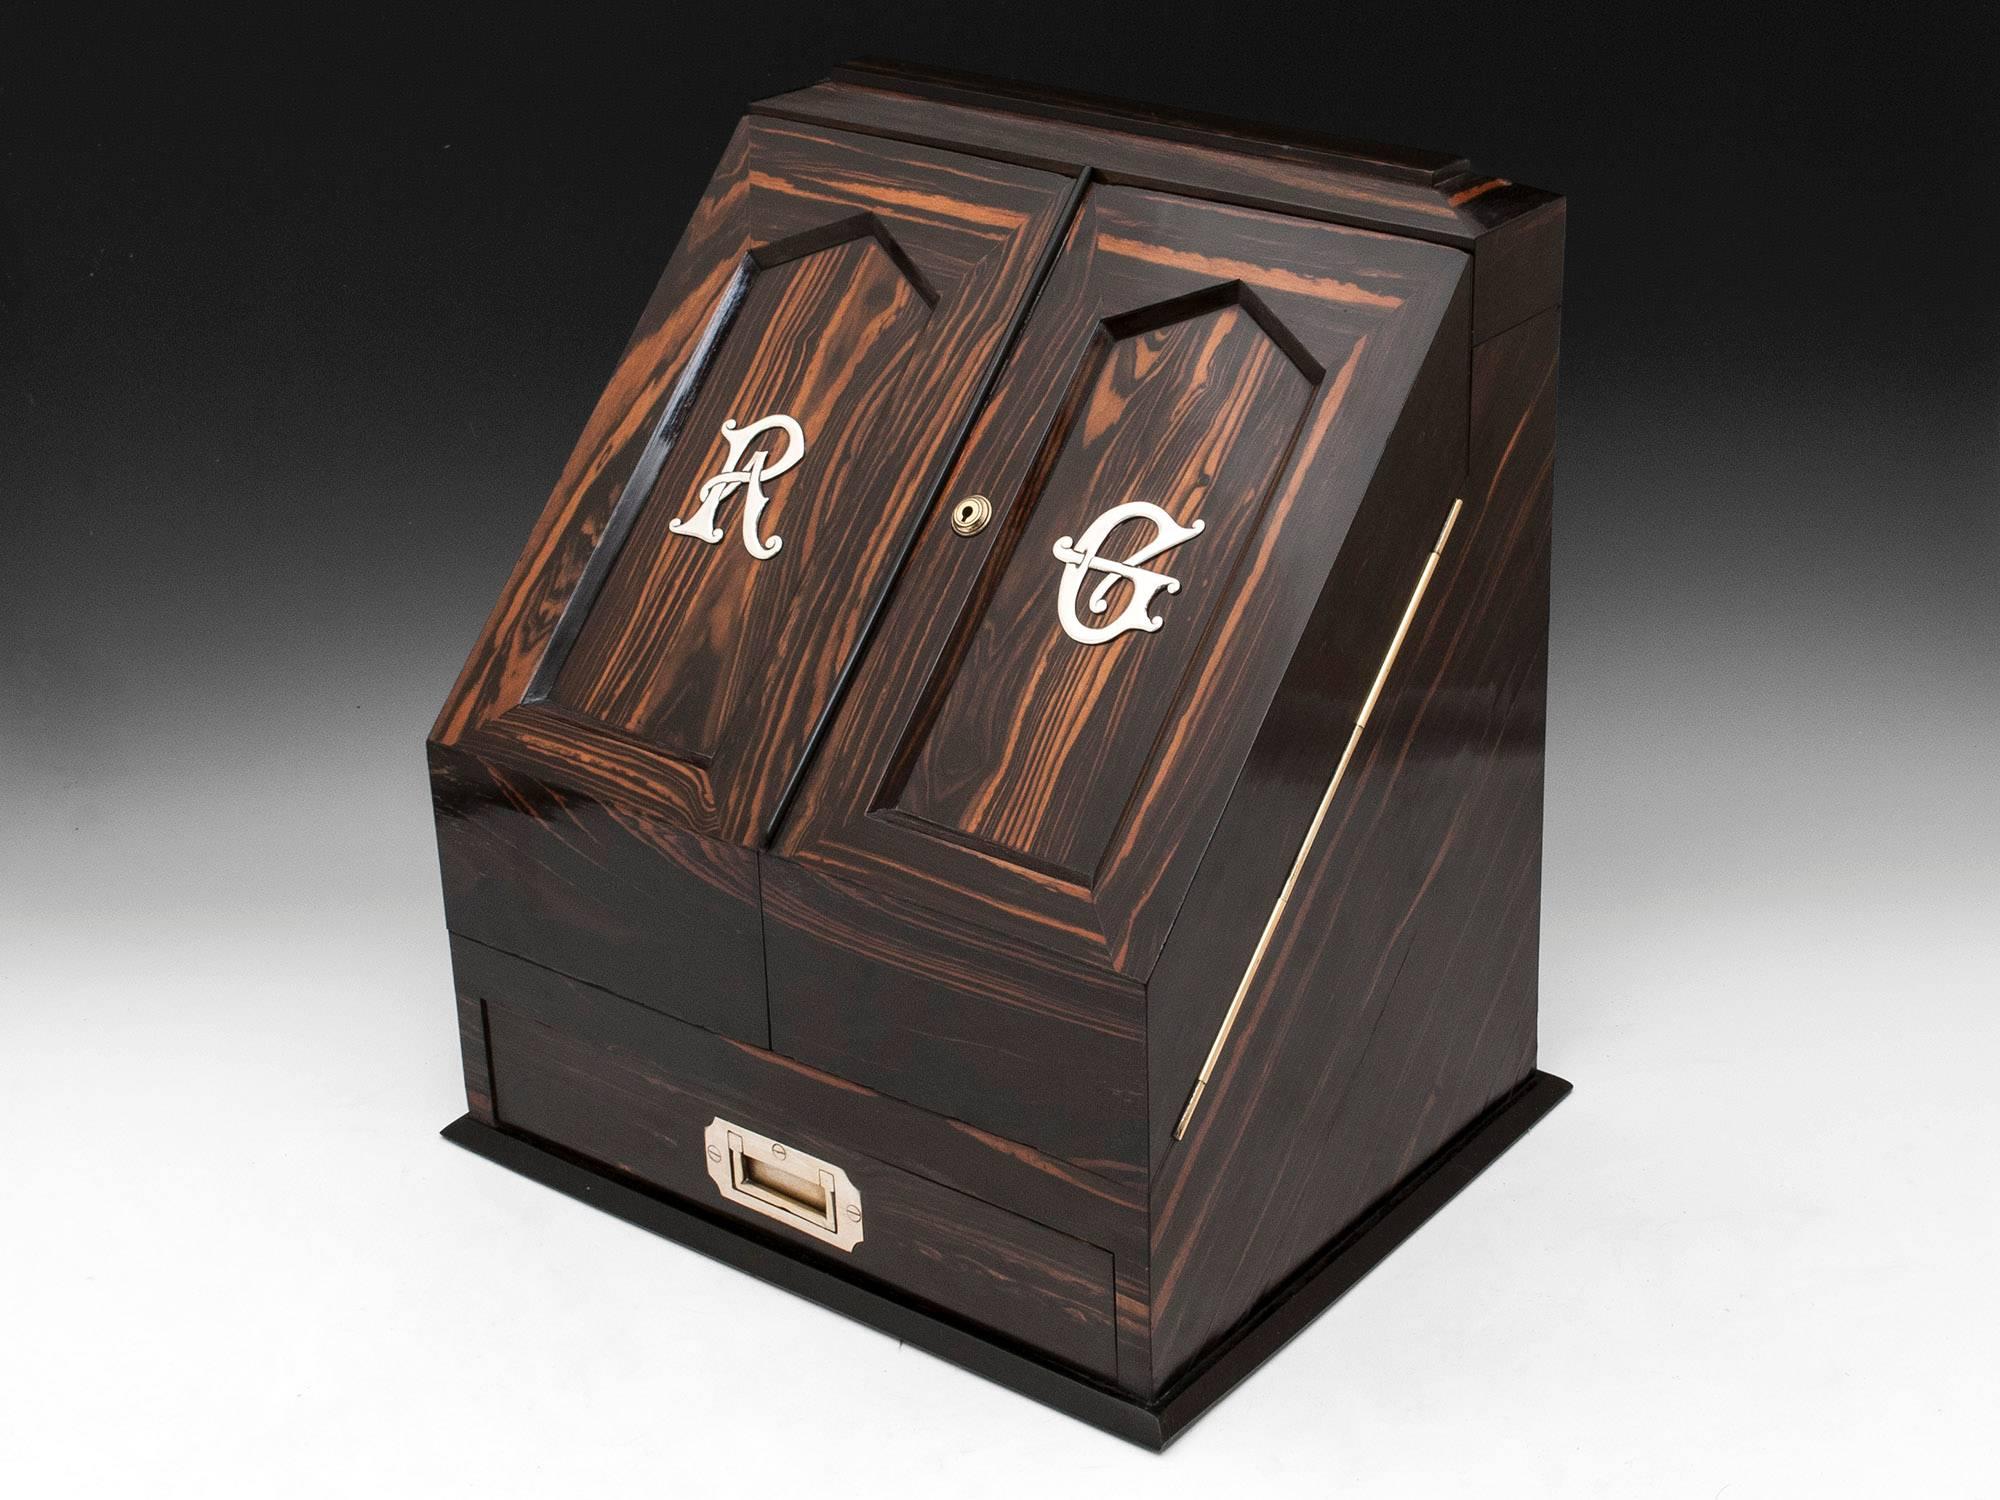 Antique stationery cabinet veneered in sumptuous and striking coromandel with silvered handled drawer to the base, monogram of R & G and Bramah lock. Opening the cabinet reveals a striking contrast interior veneered in another exotic timber,